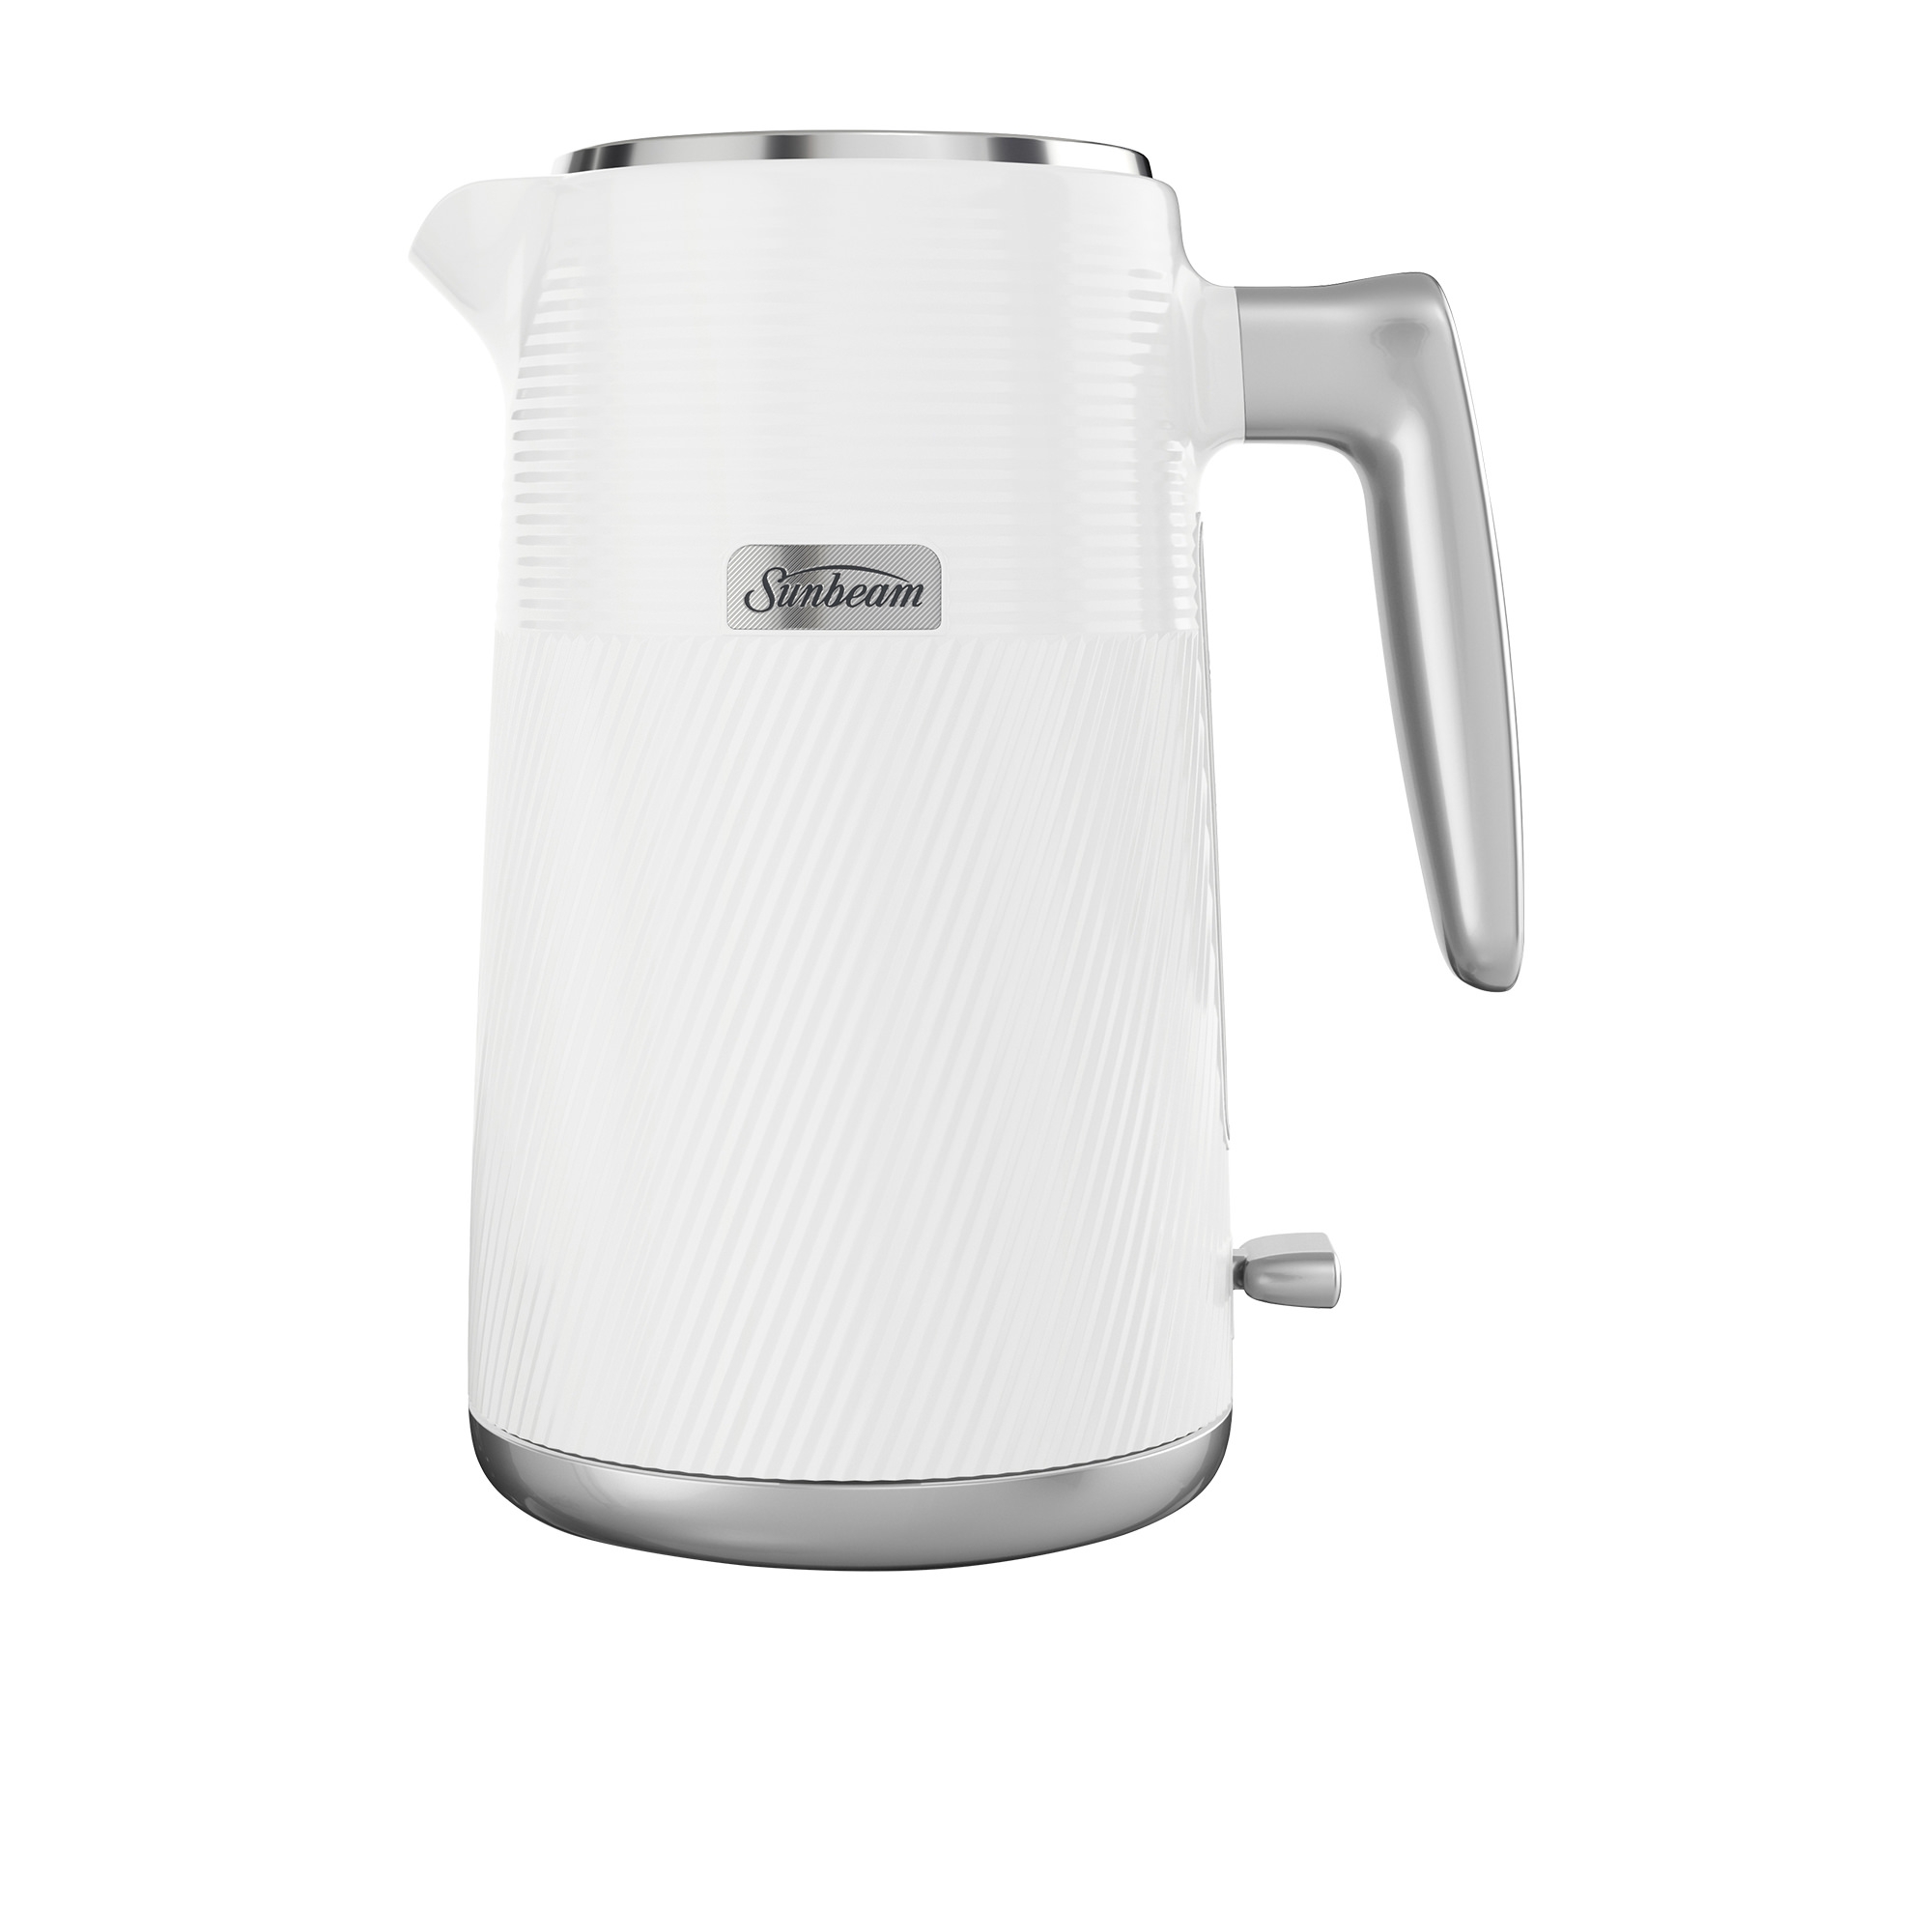 Sunbeam Obliq Collection KEP3007WH Electric Kettle 1.7L White Image 1